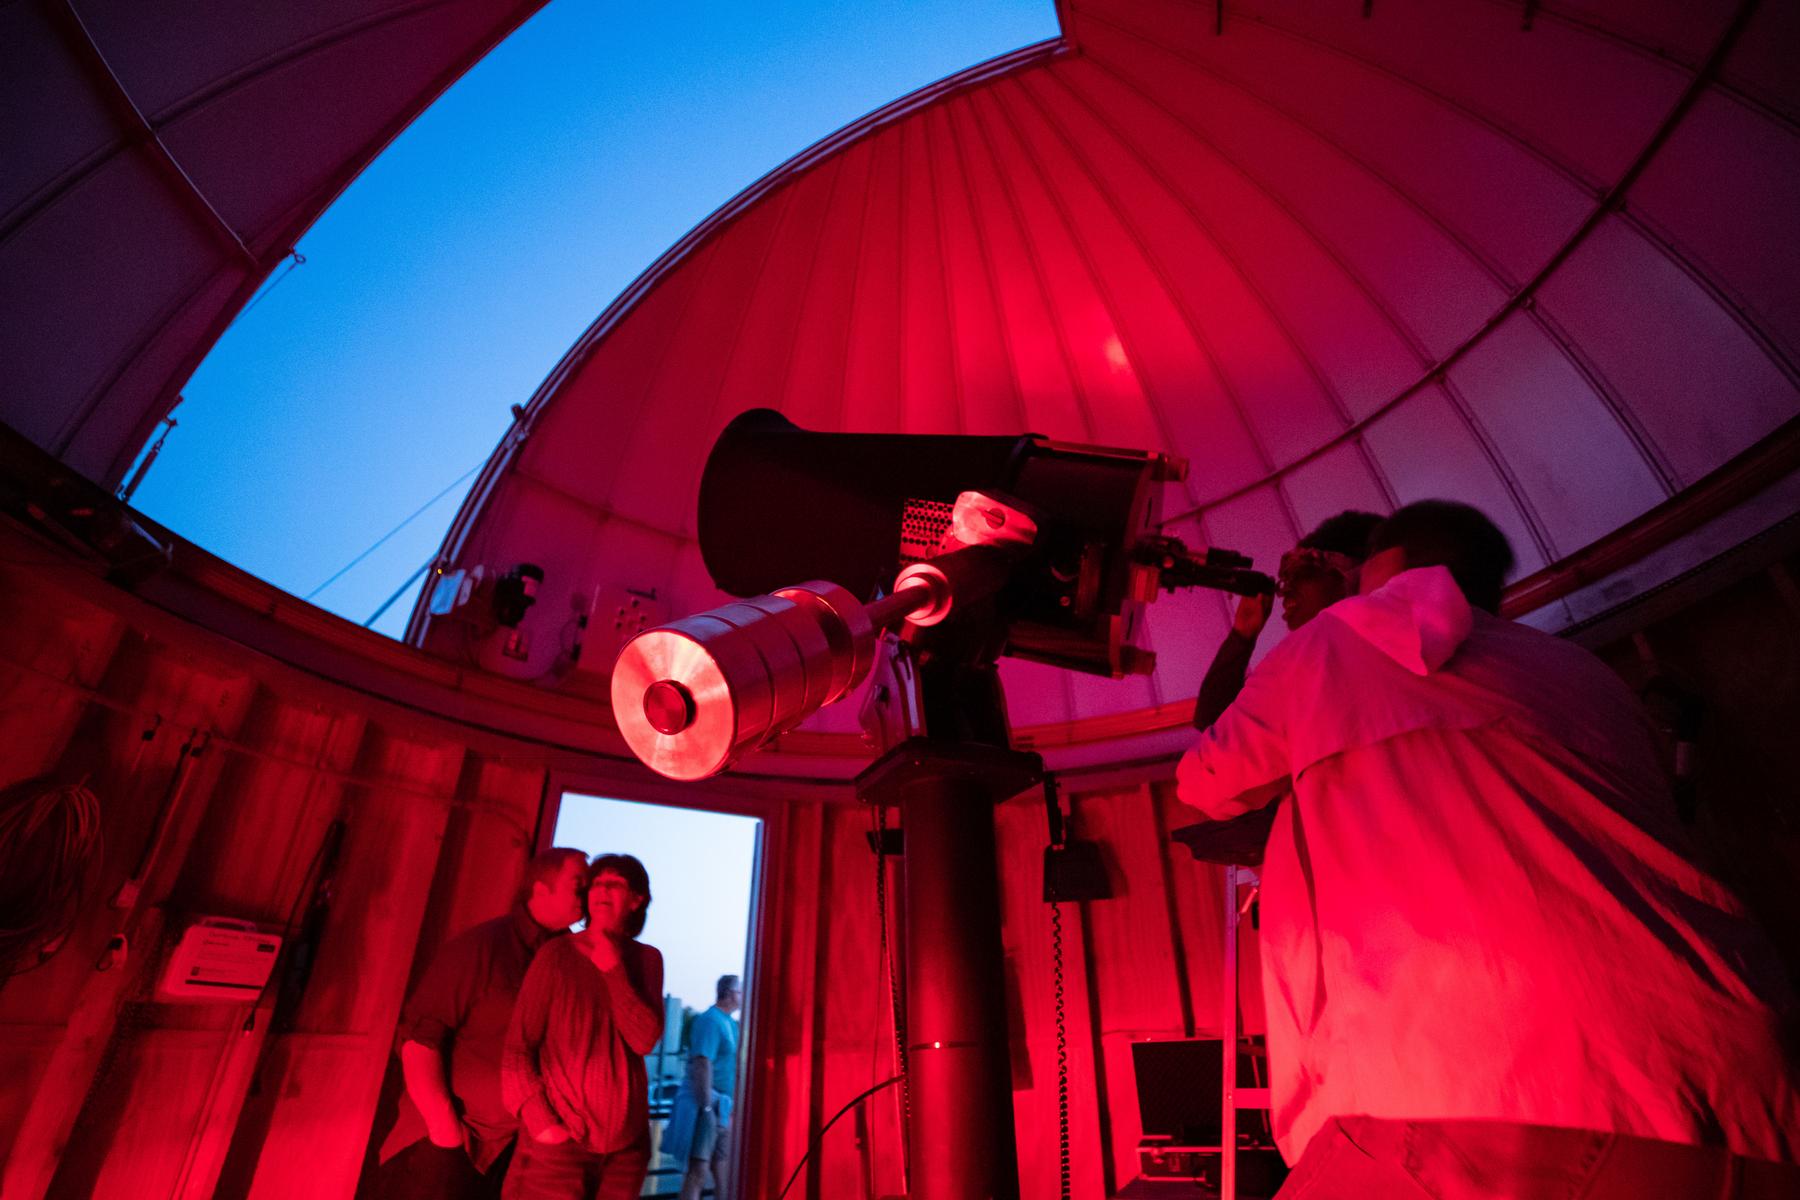 Austin Peay invites public to see lunar occultation of Mars